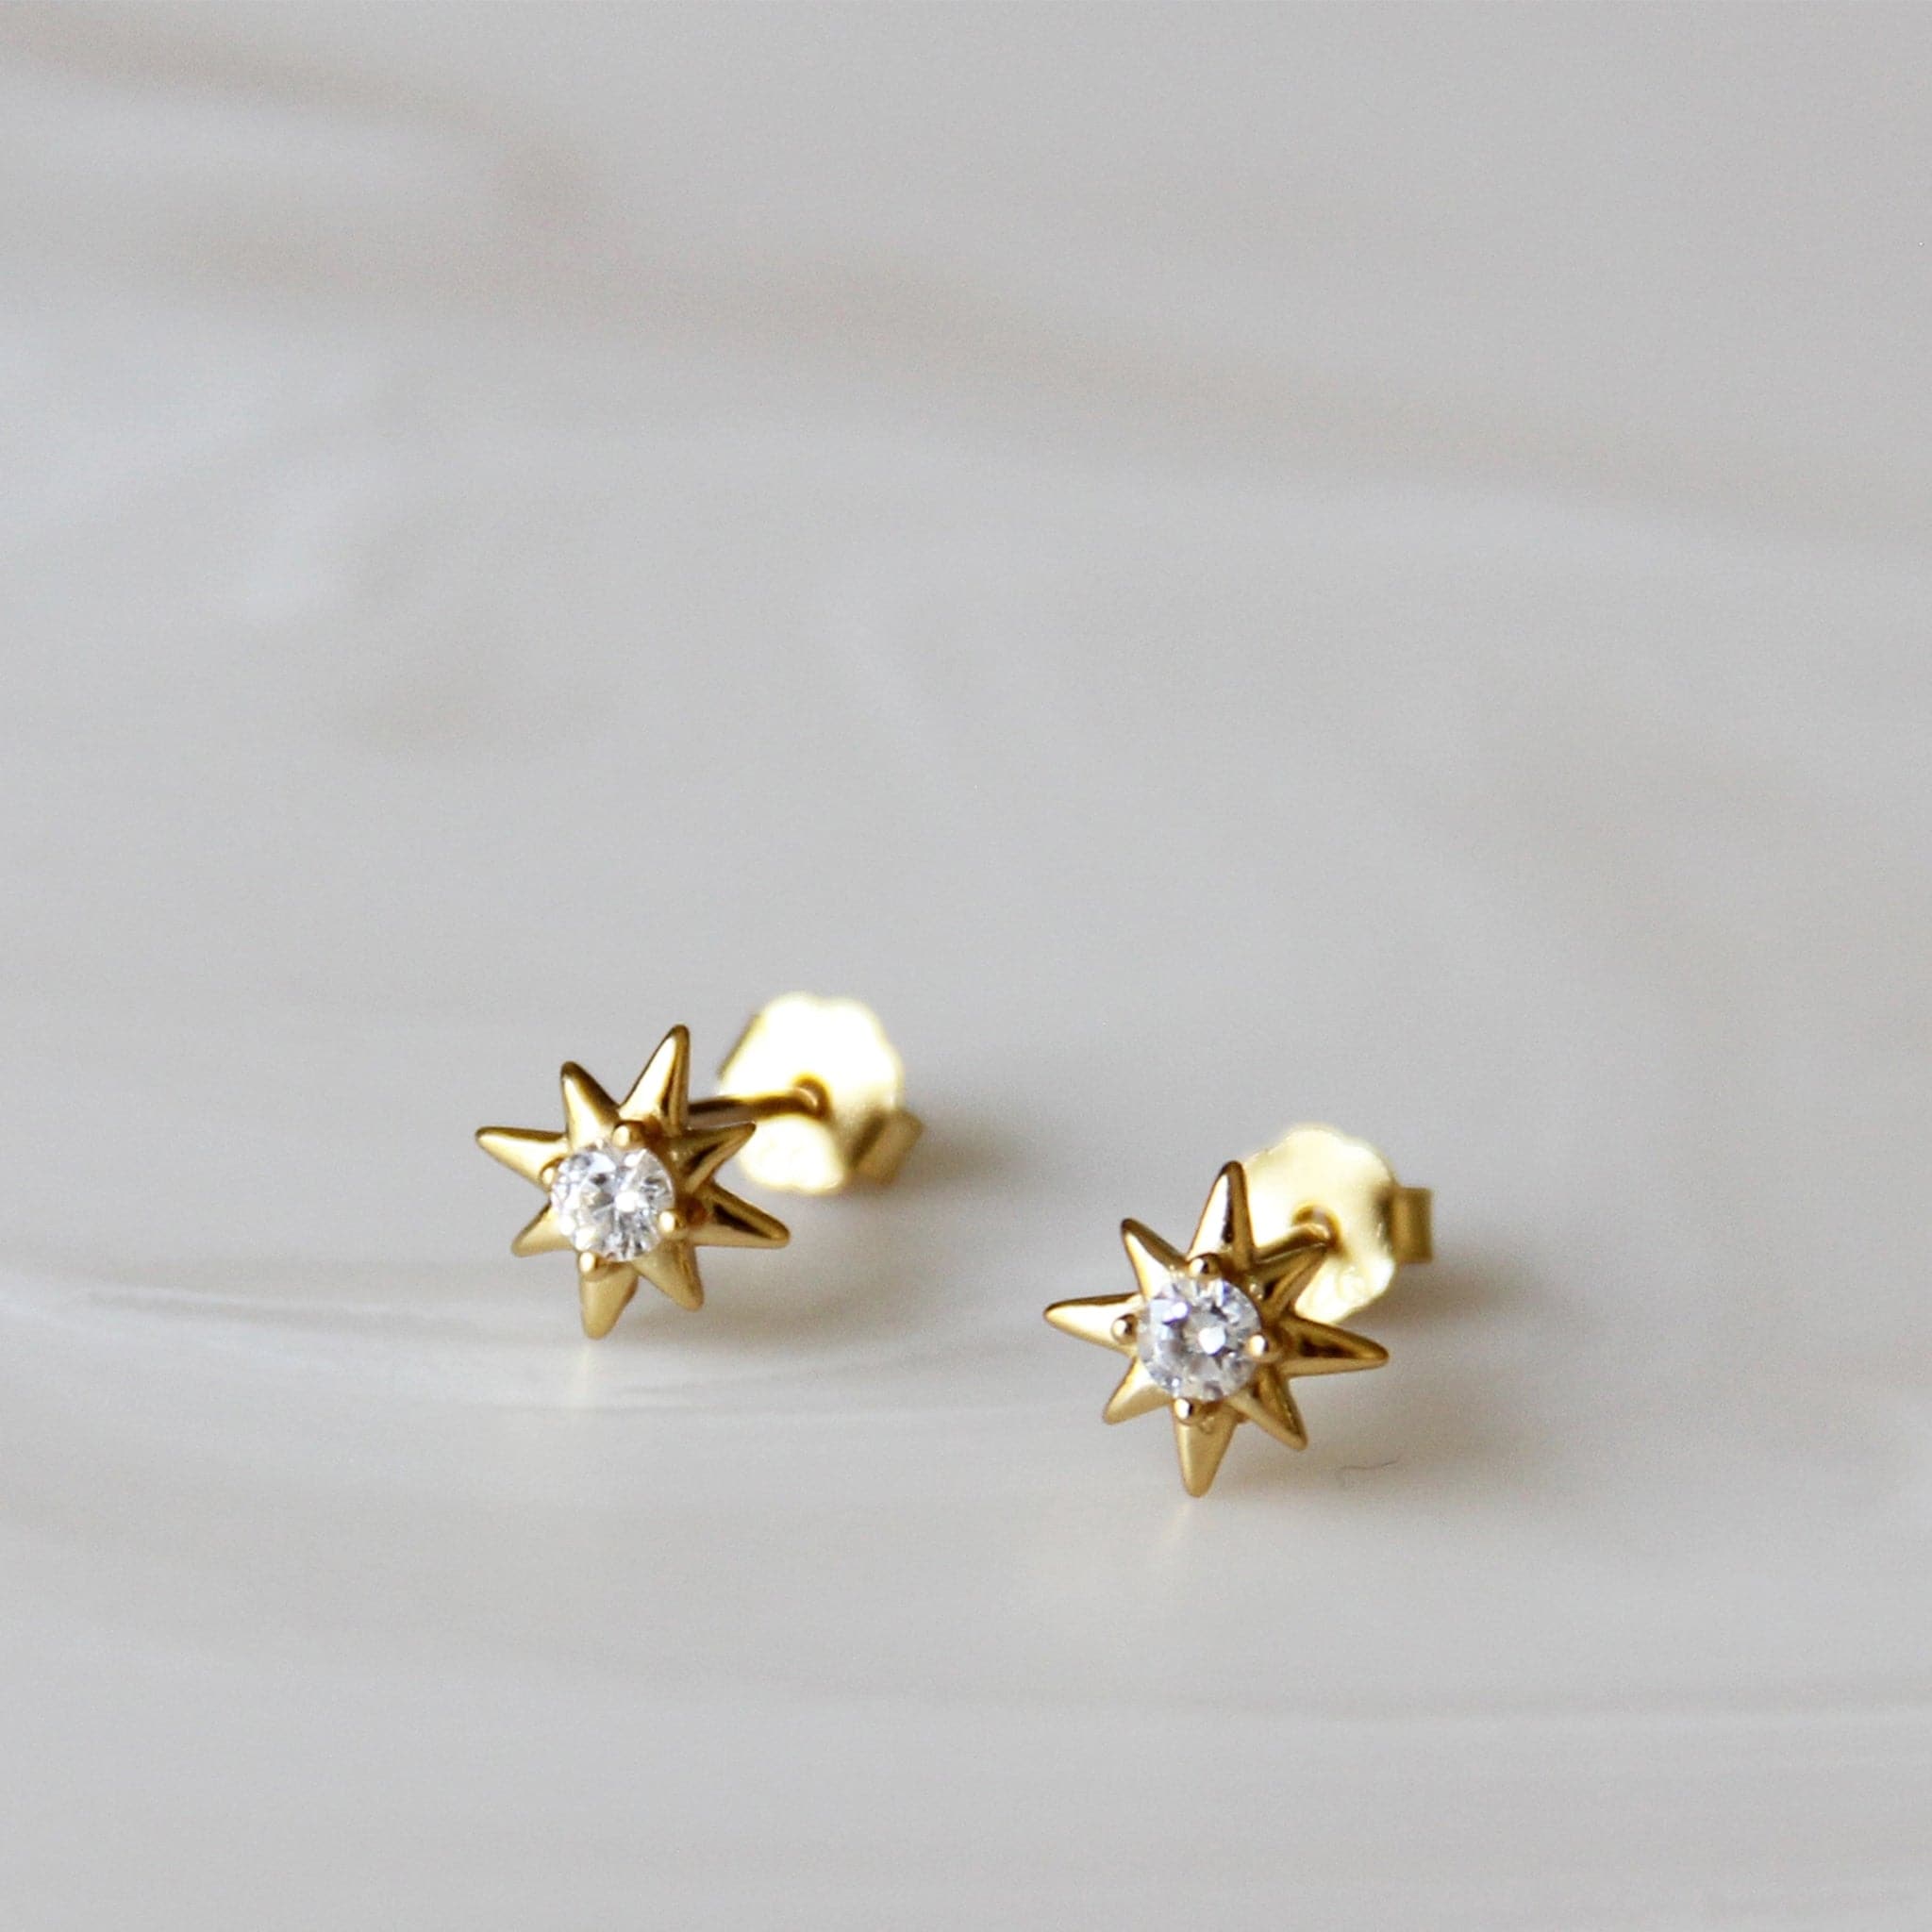 Stud earrings with a 8-point star shape and cz stone in the center.